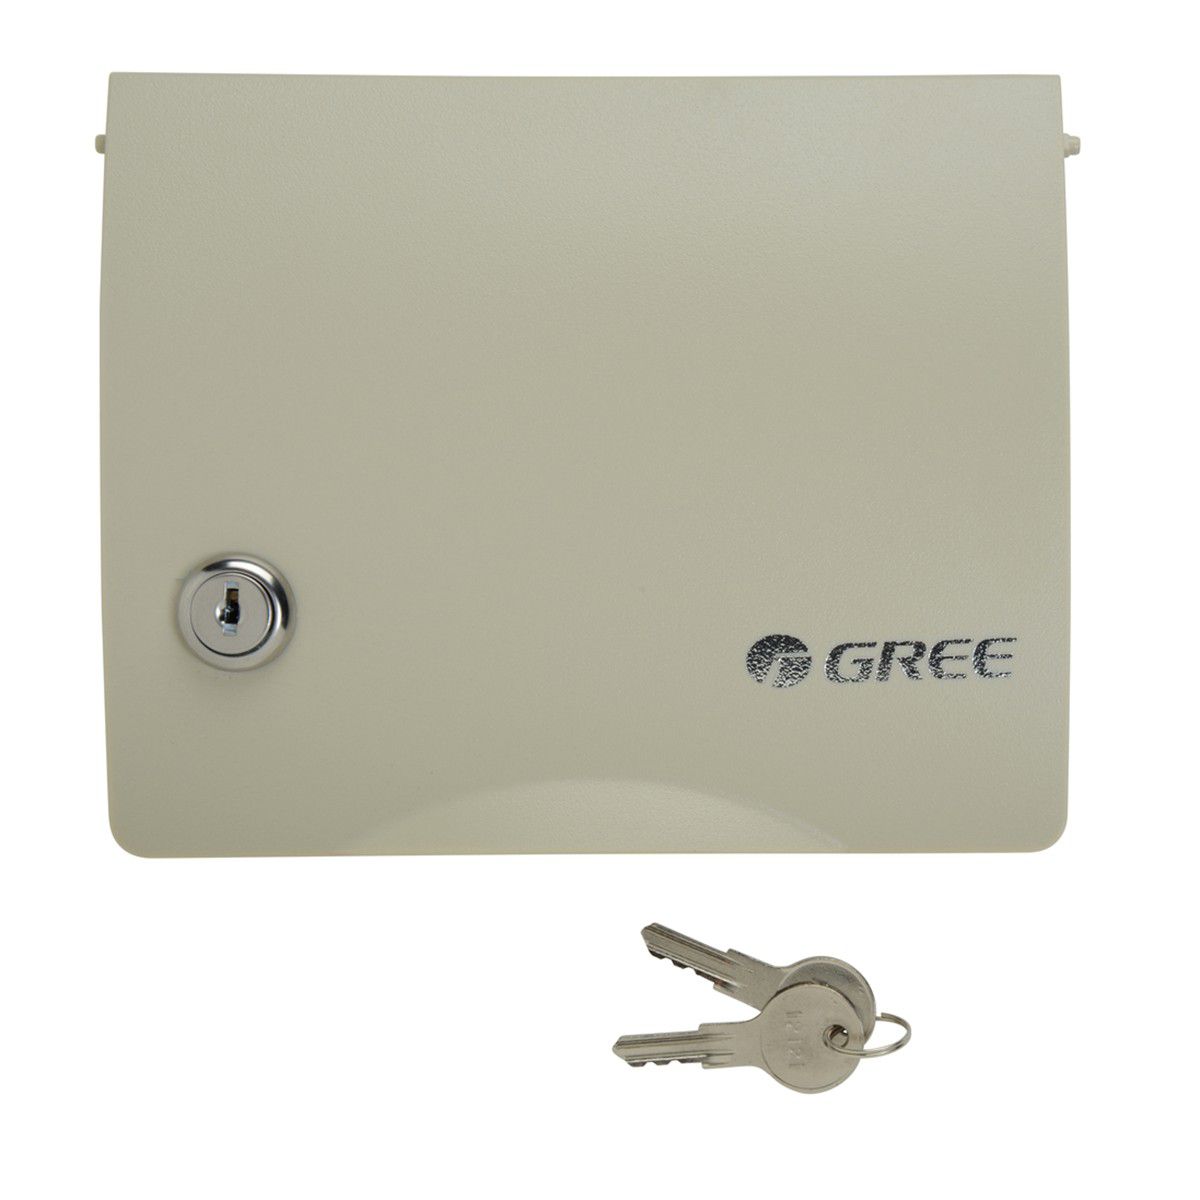 First America - ETAC Locking door with keys to prevent unauthorized Access to control settings